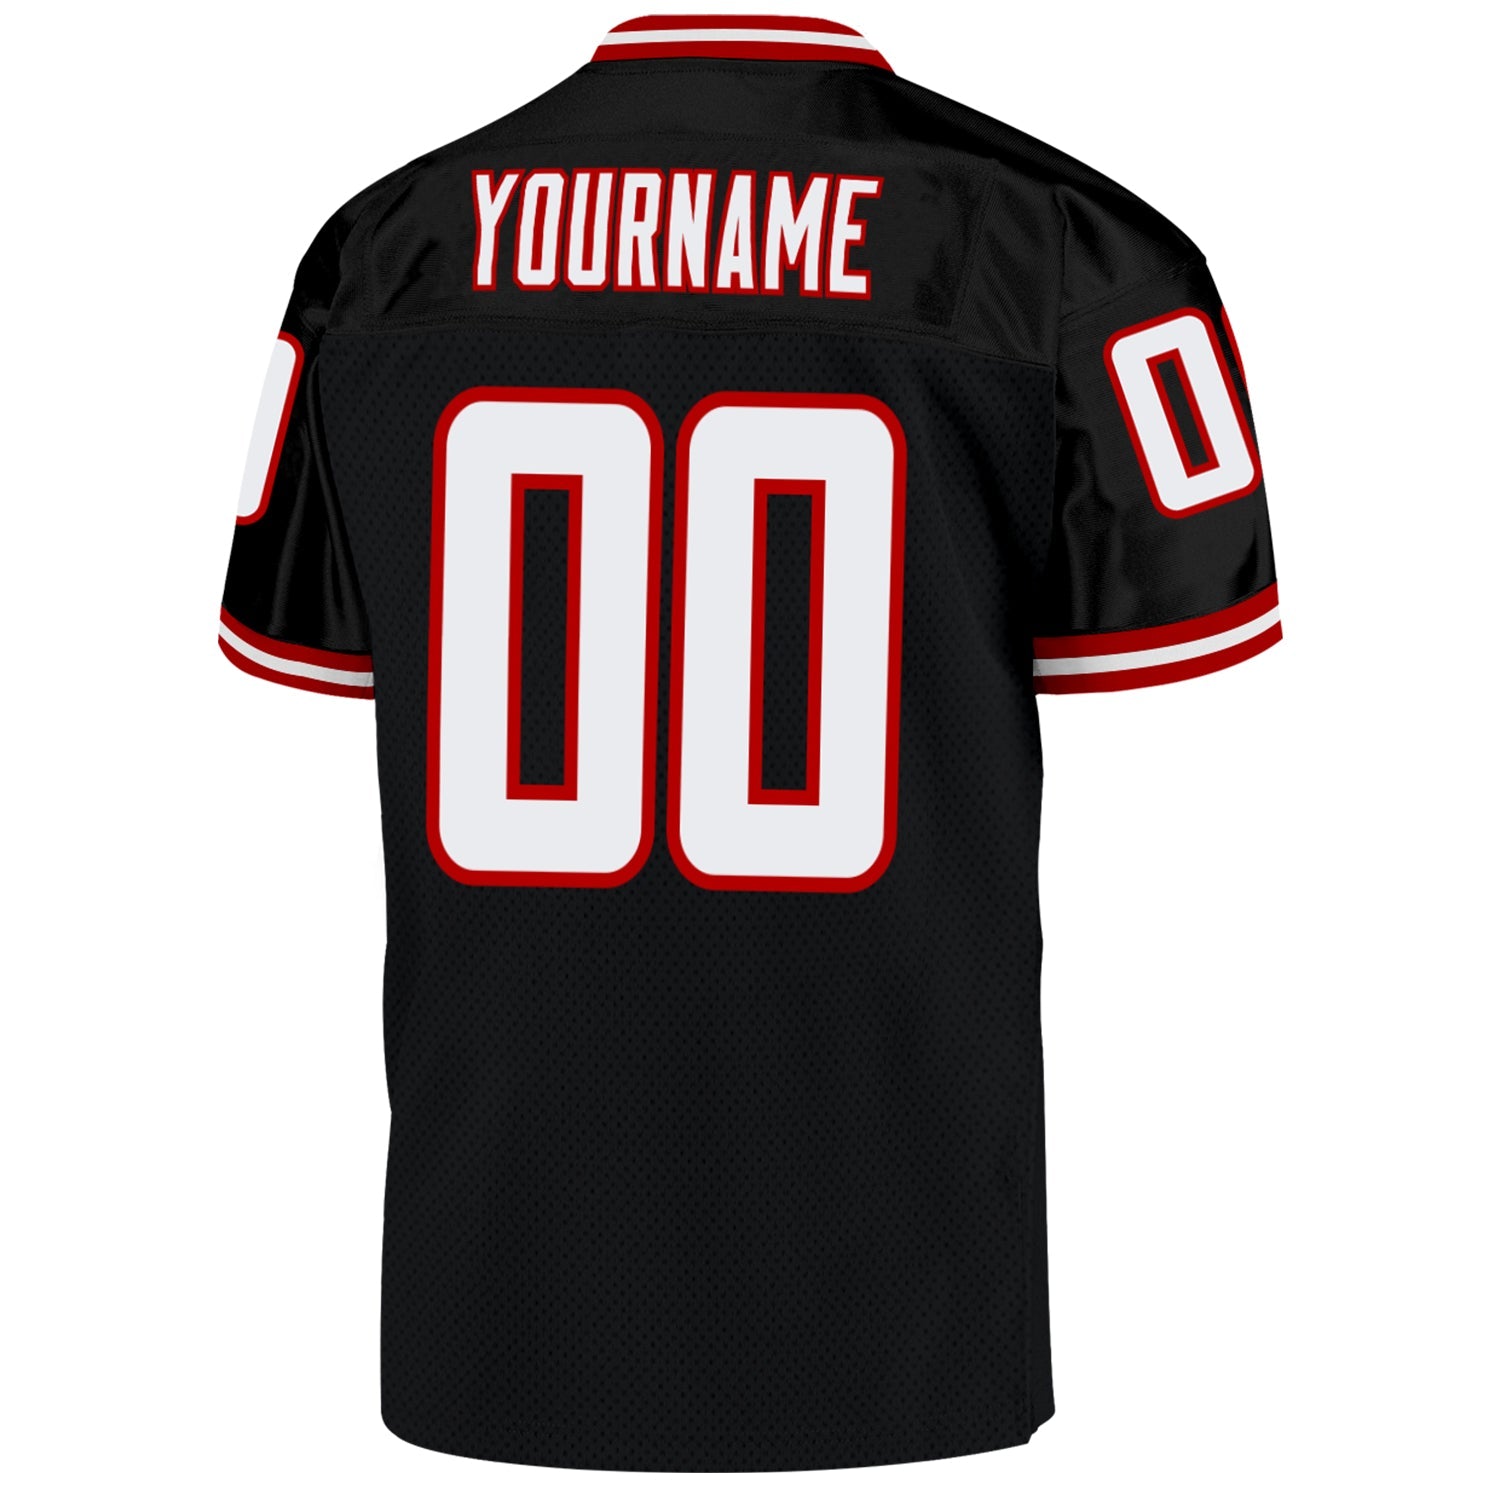 Custom Black White-Red Mesh Authentic Throwback Football Jersey